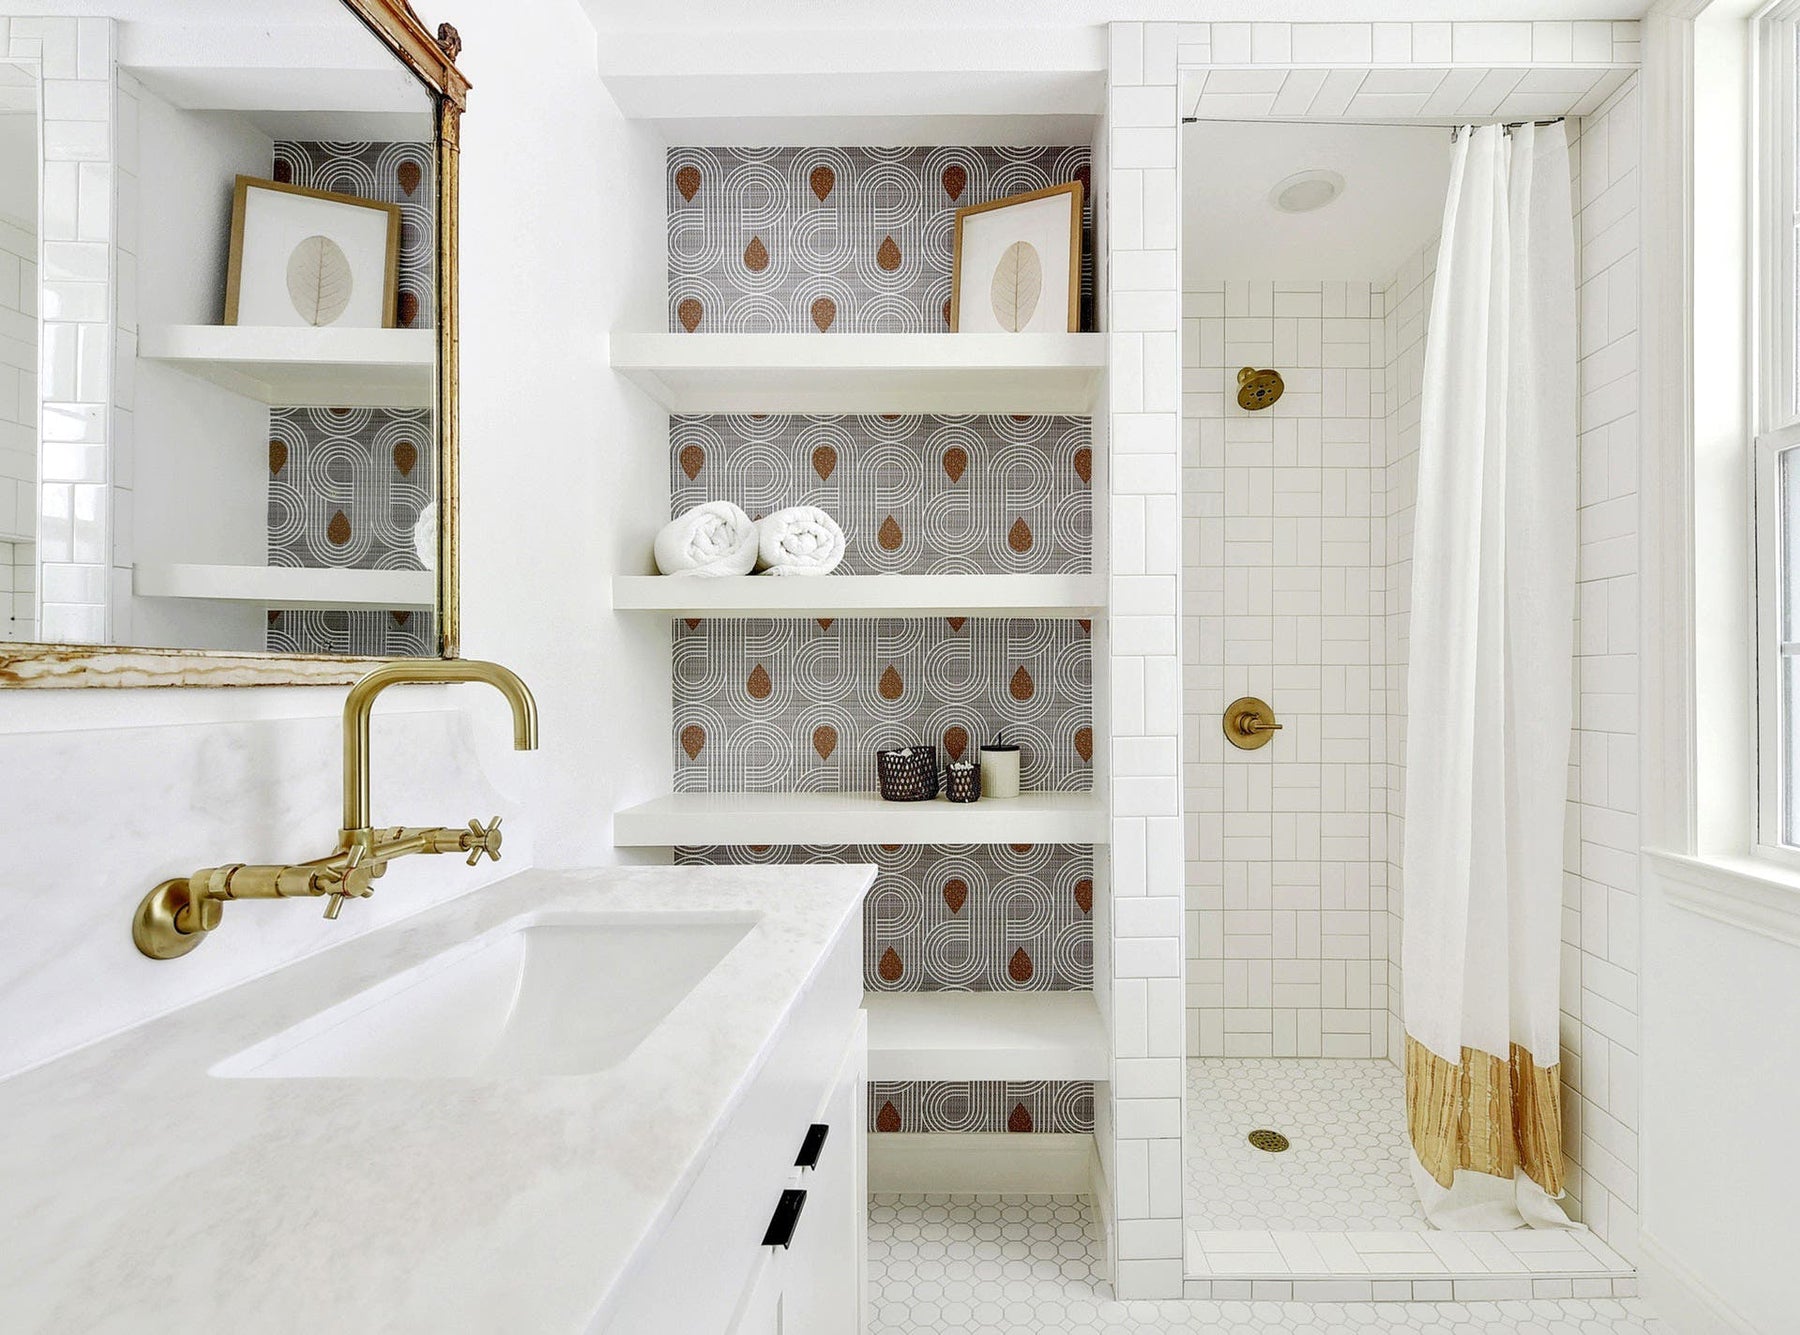 Safety Tips for Designing an Accessible Bathroom